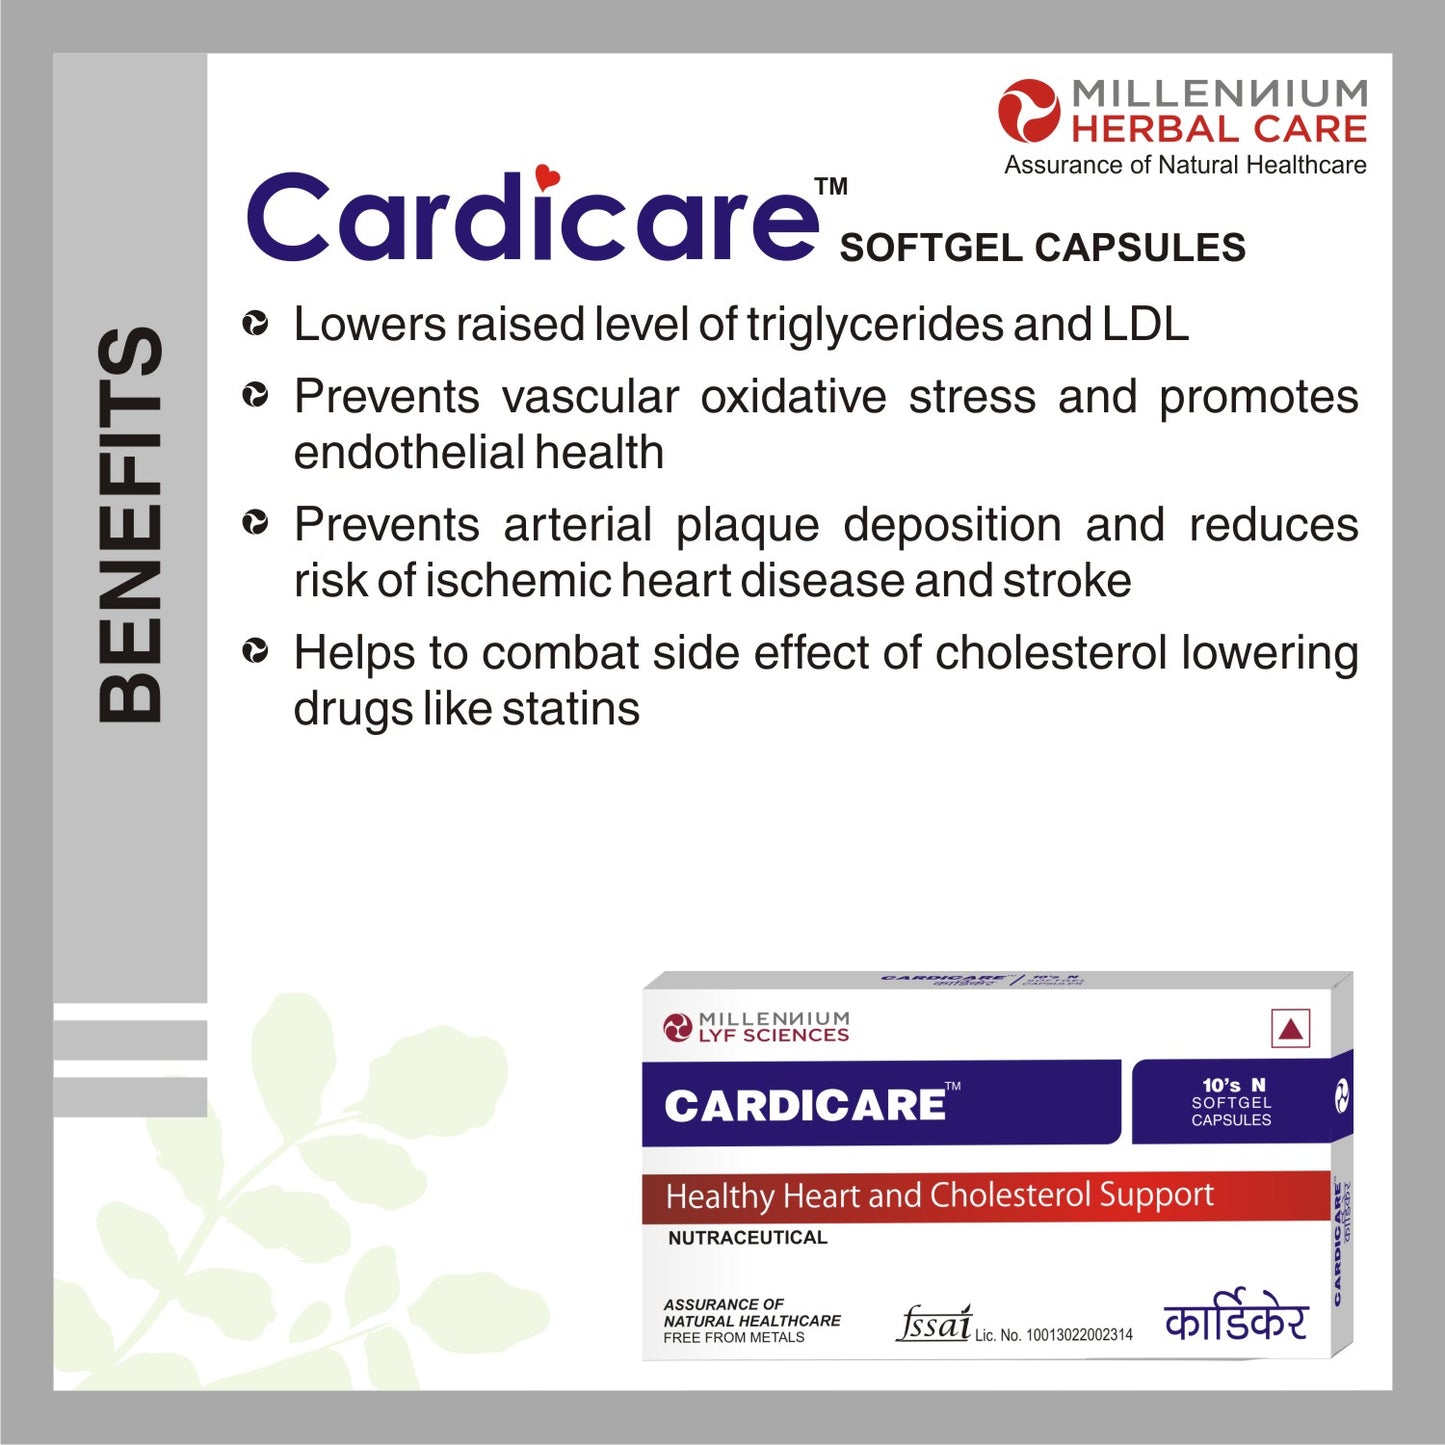 Benefits of Cardicare